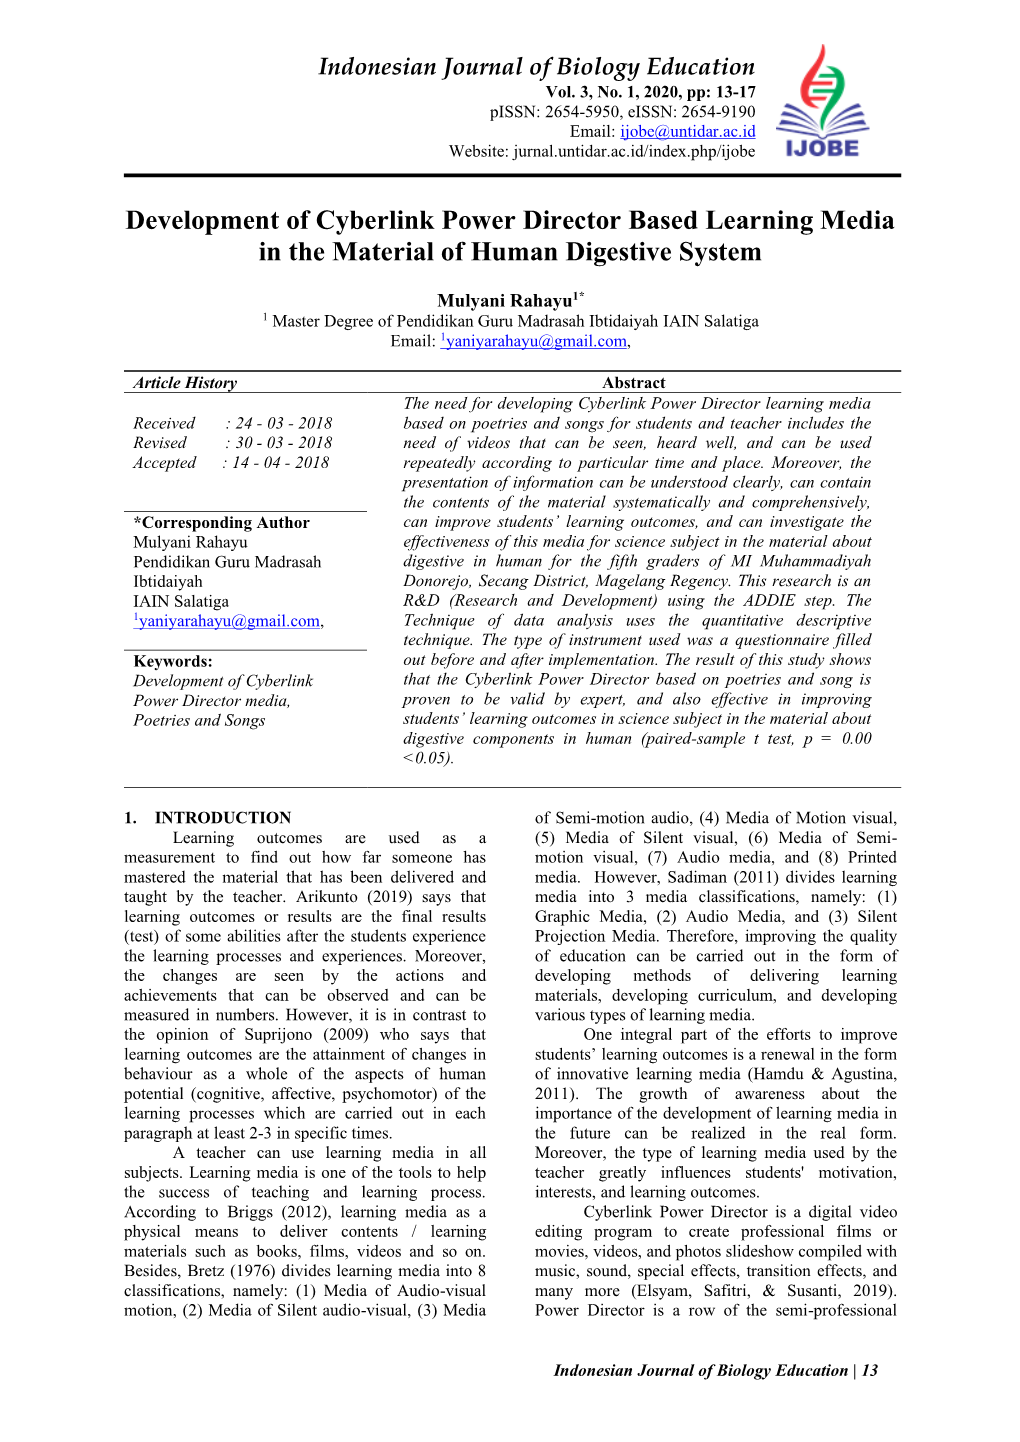 Development of Cyberlink Power Director Based Learning Media in the Material of Human Digestive System